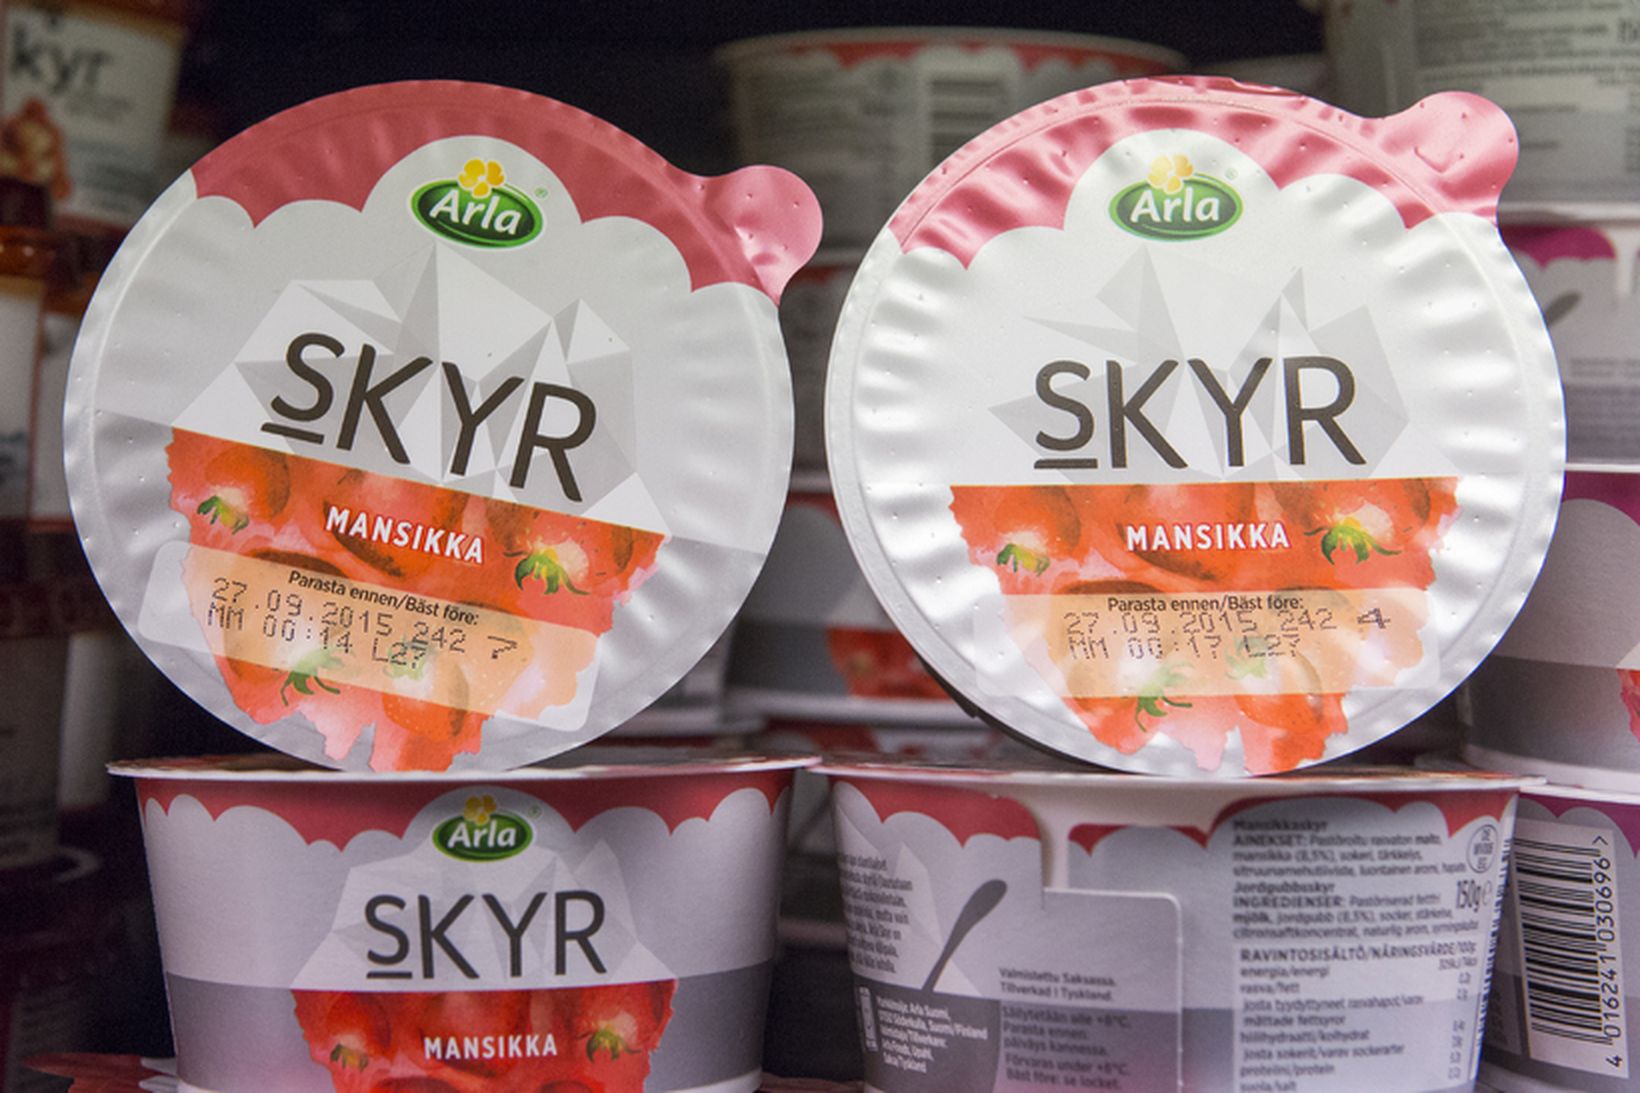 Swedish Arla banned from selling skyr in Finland